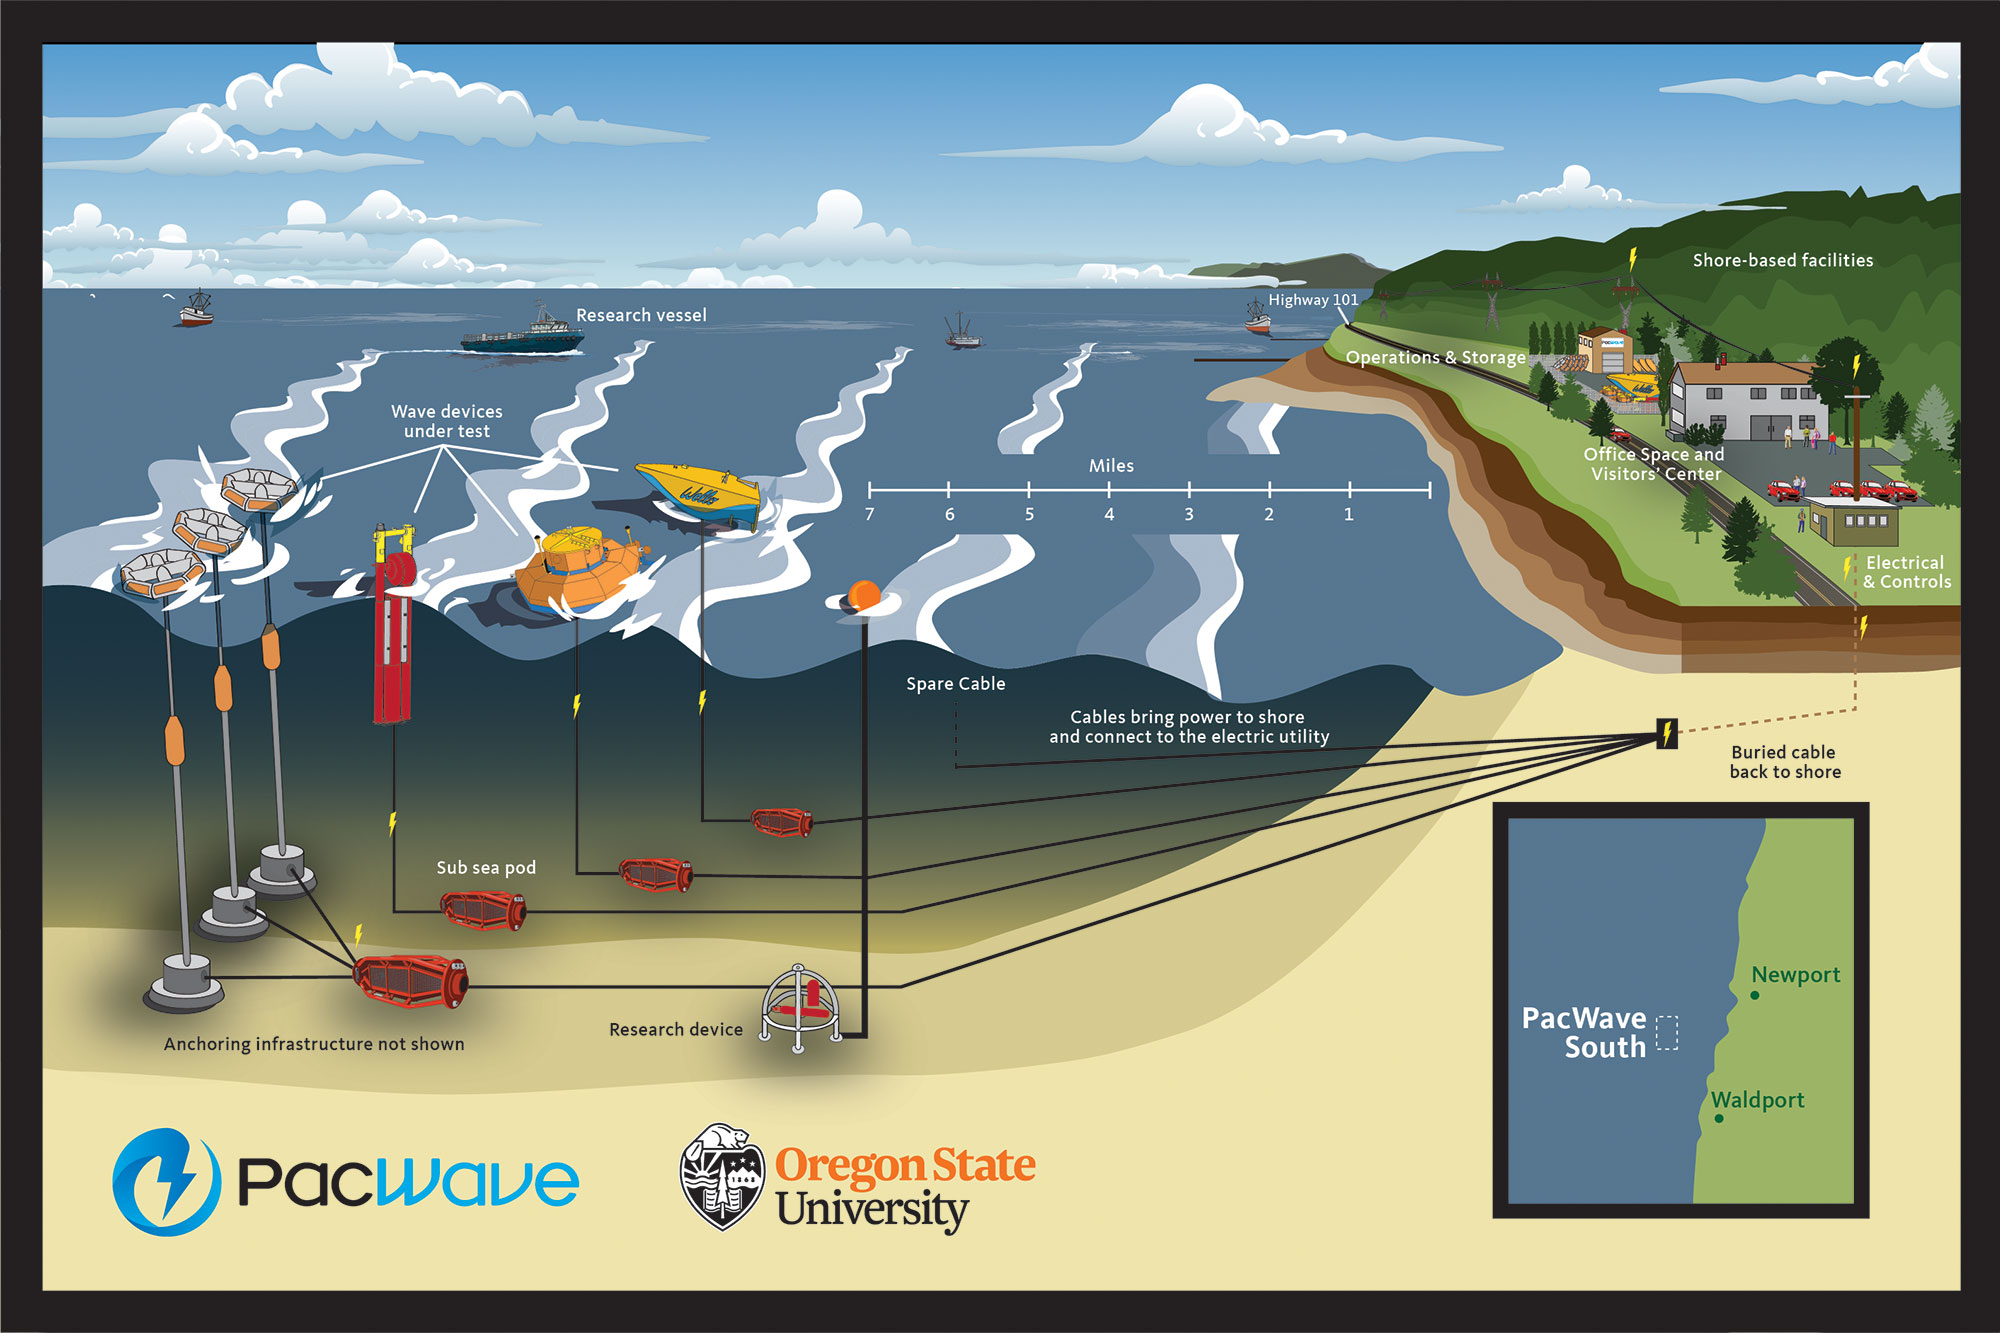 A rendering of PacWave South site